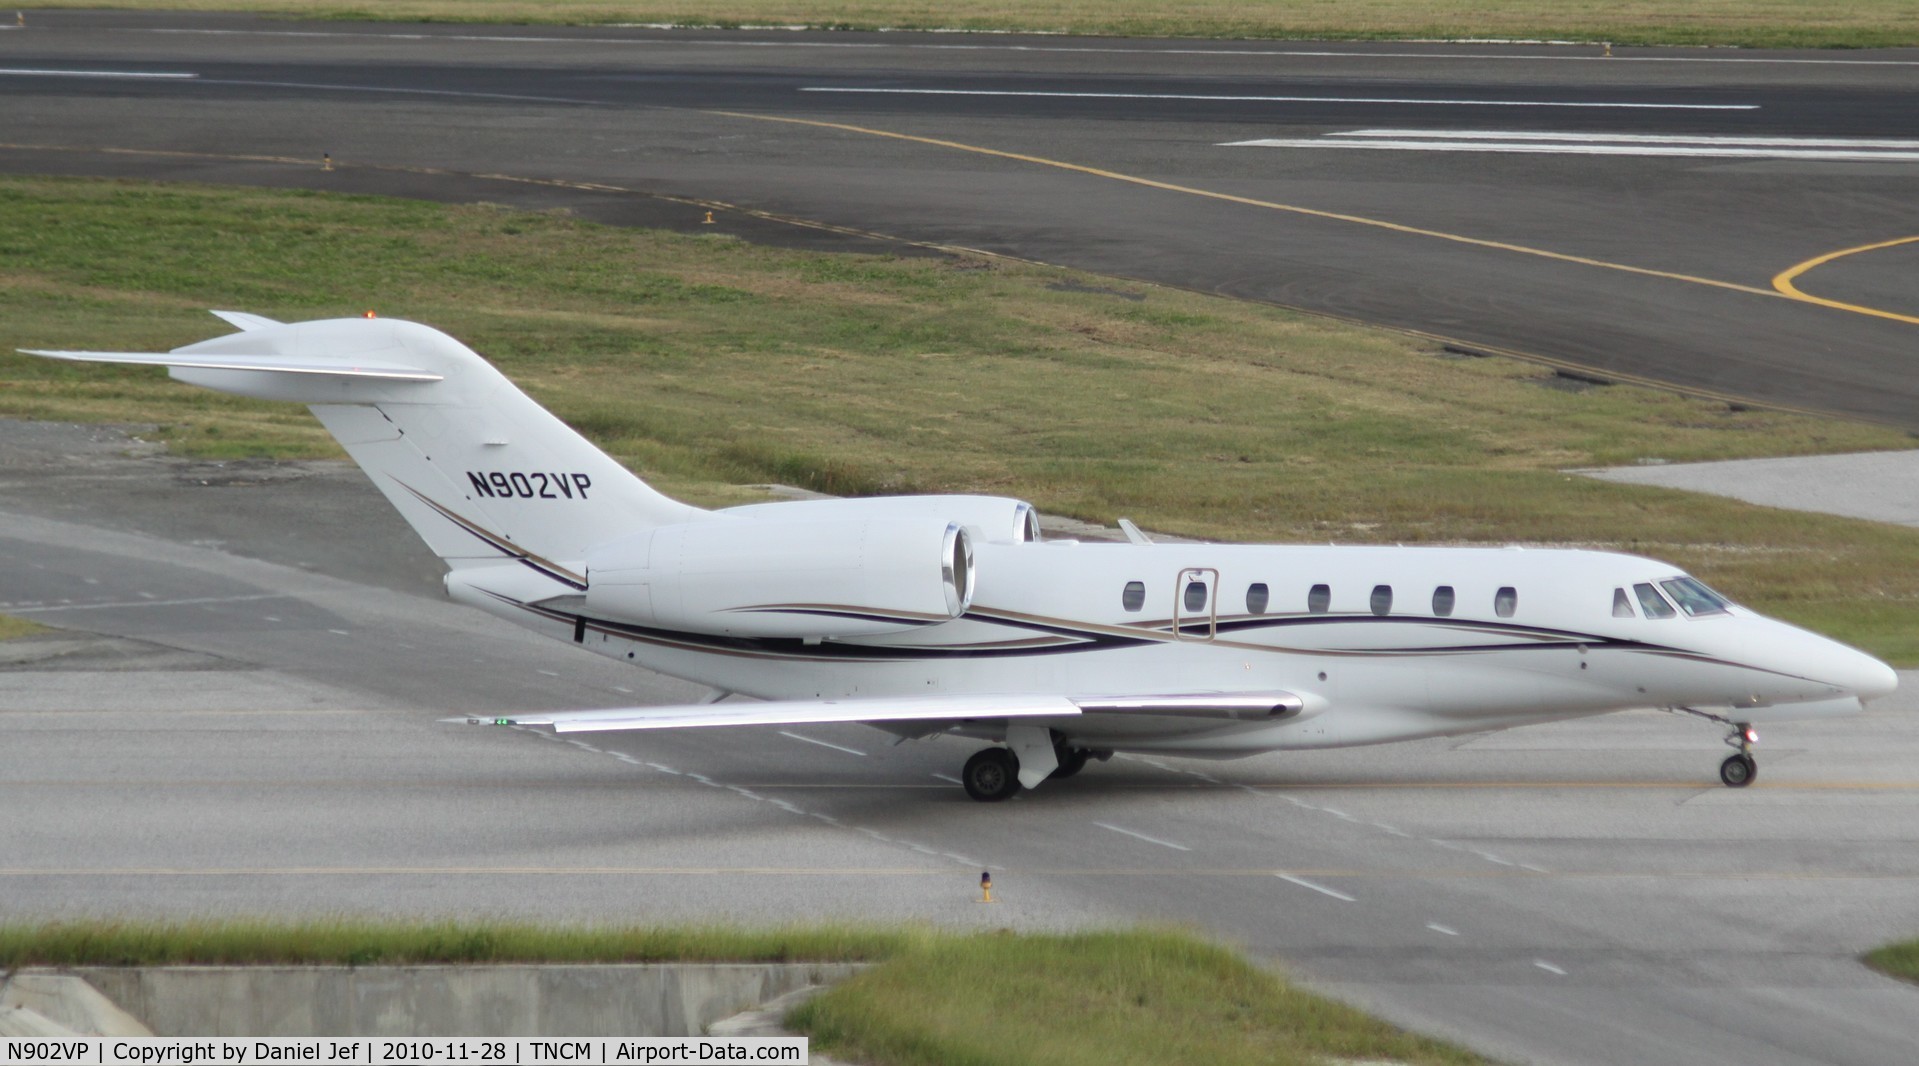 N902VP, 1997 Cessna 750 Citation X Citation X C/N 750-0002, N902VP taxing to the holding point A